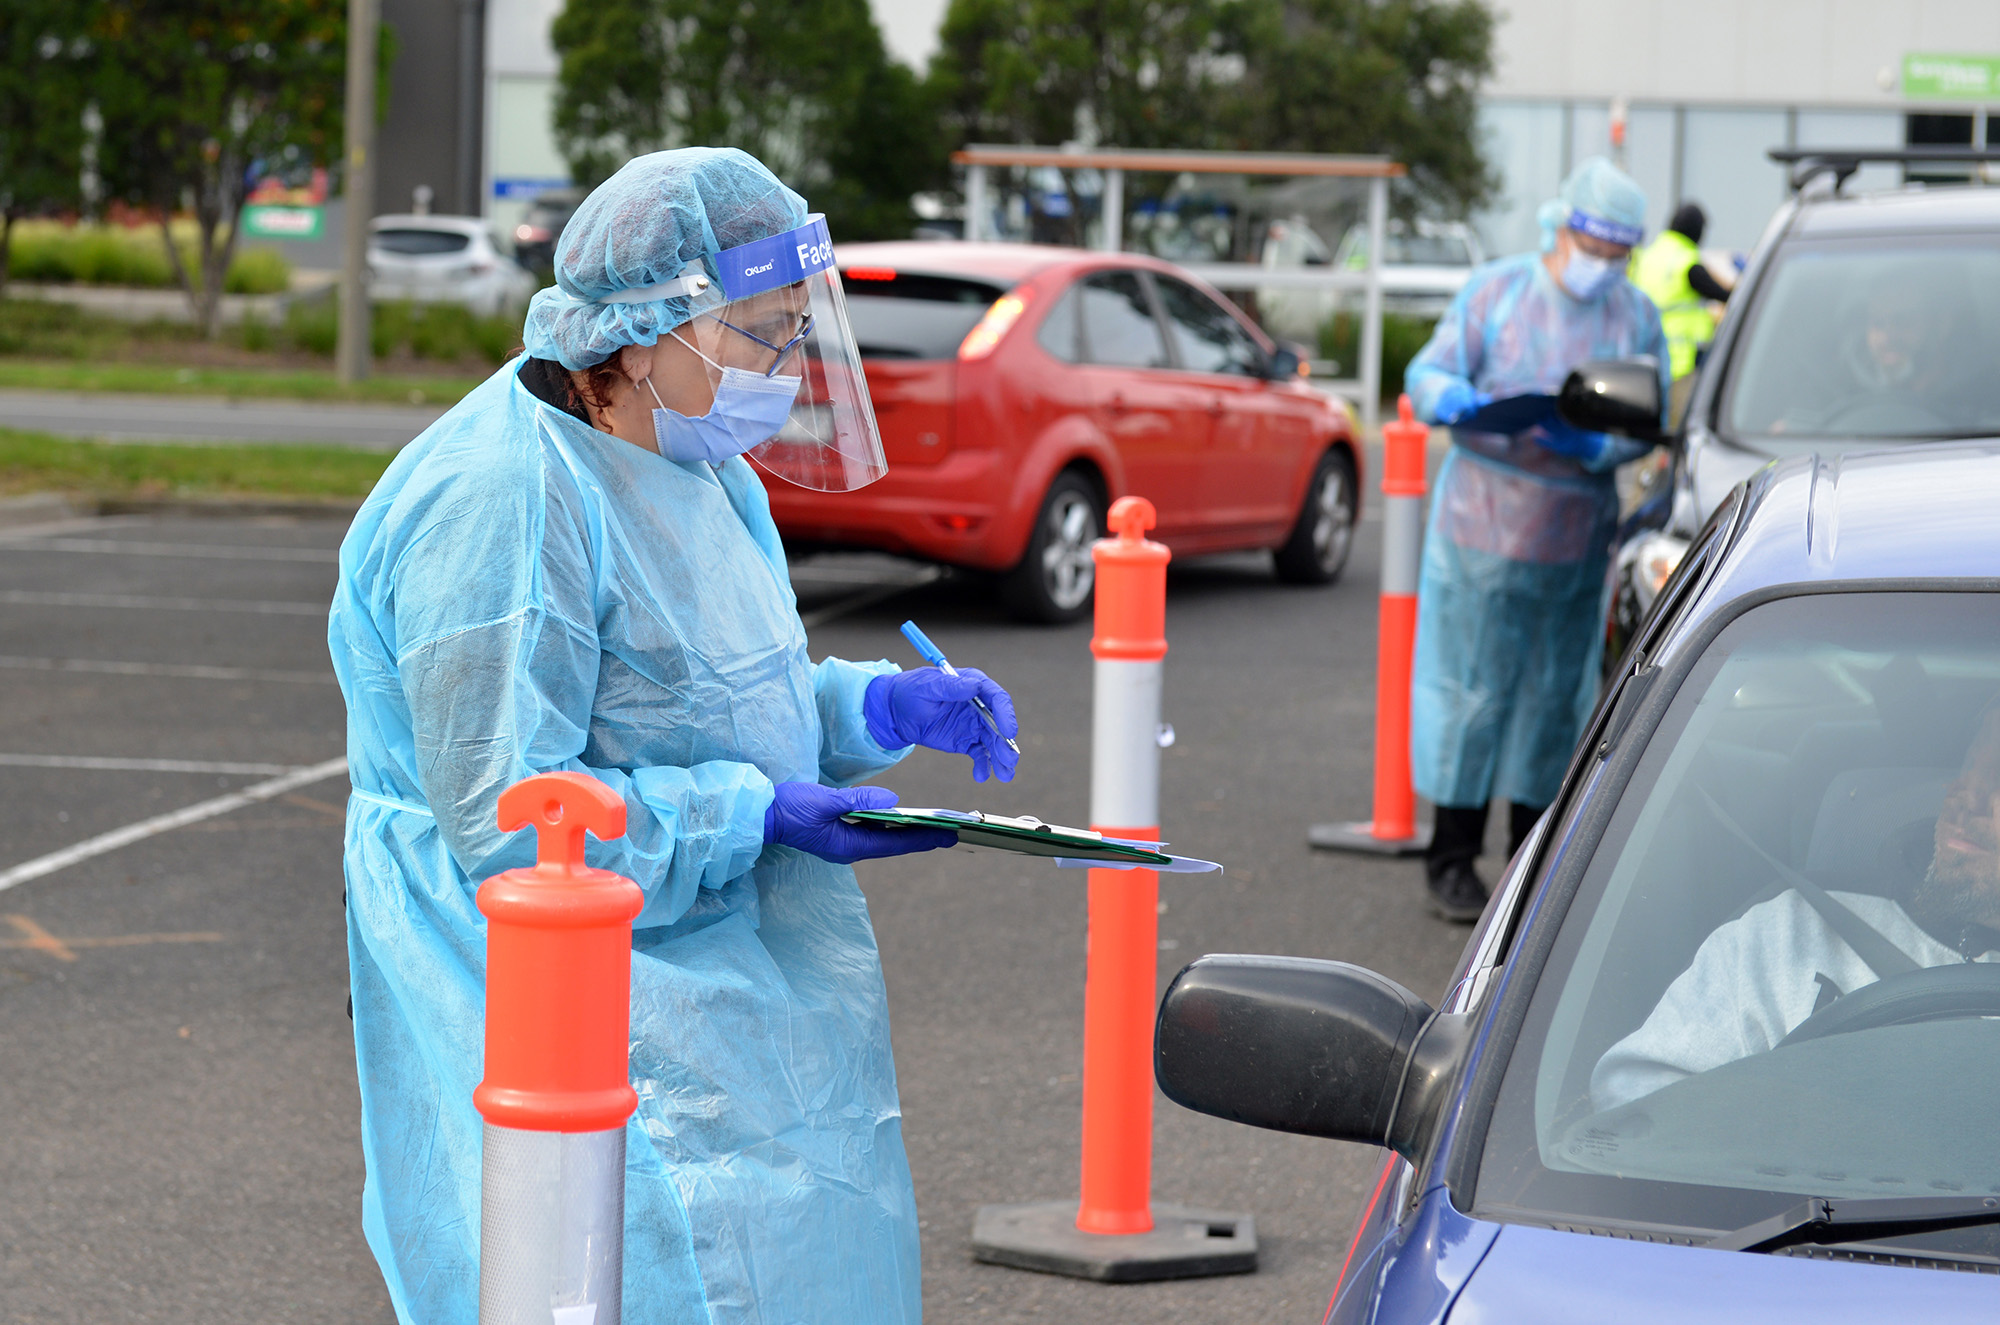 Medical workers conduct testing for the coronavirus (COVID-19) at a drive-thru testing site in Melbourne, Australia on July 10, 2020. 